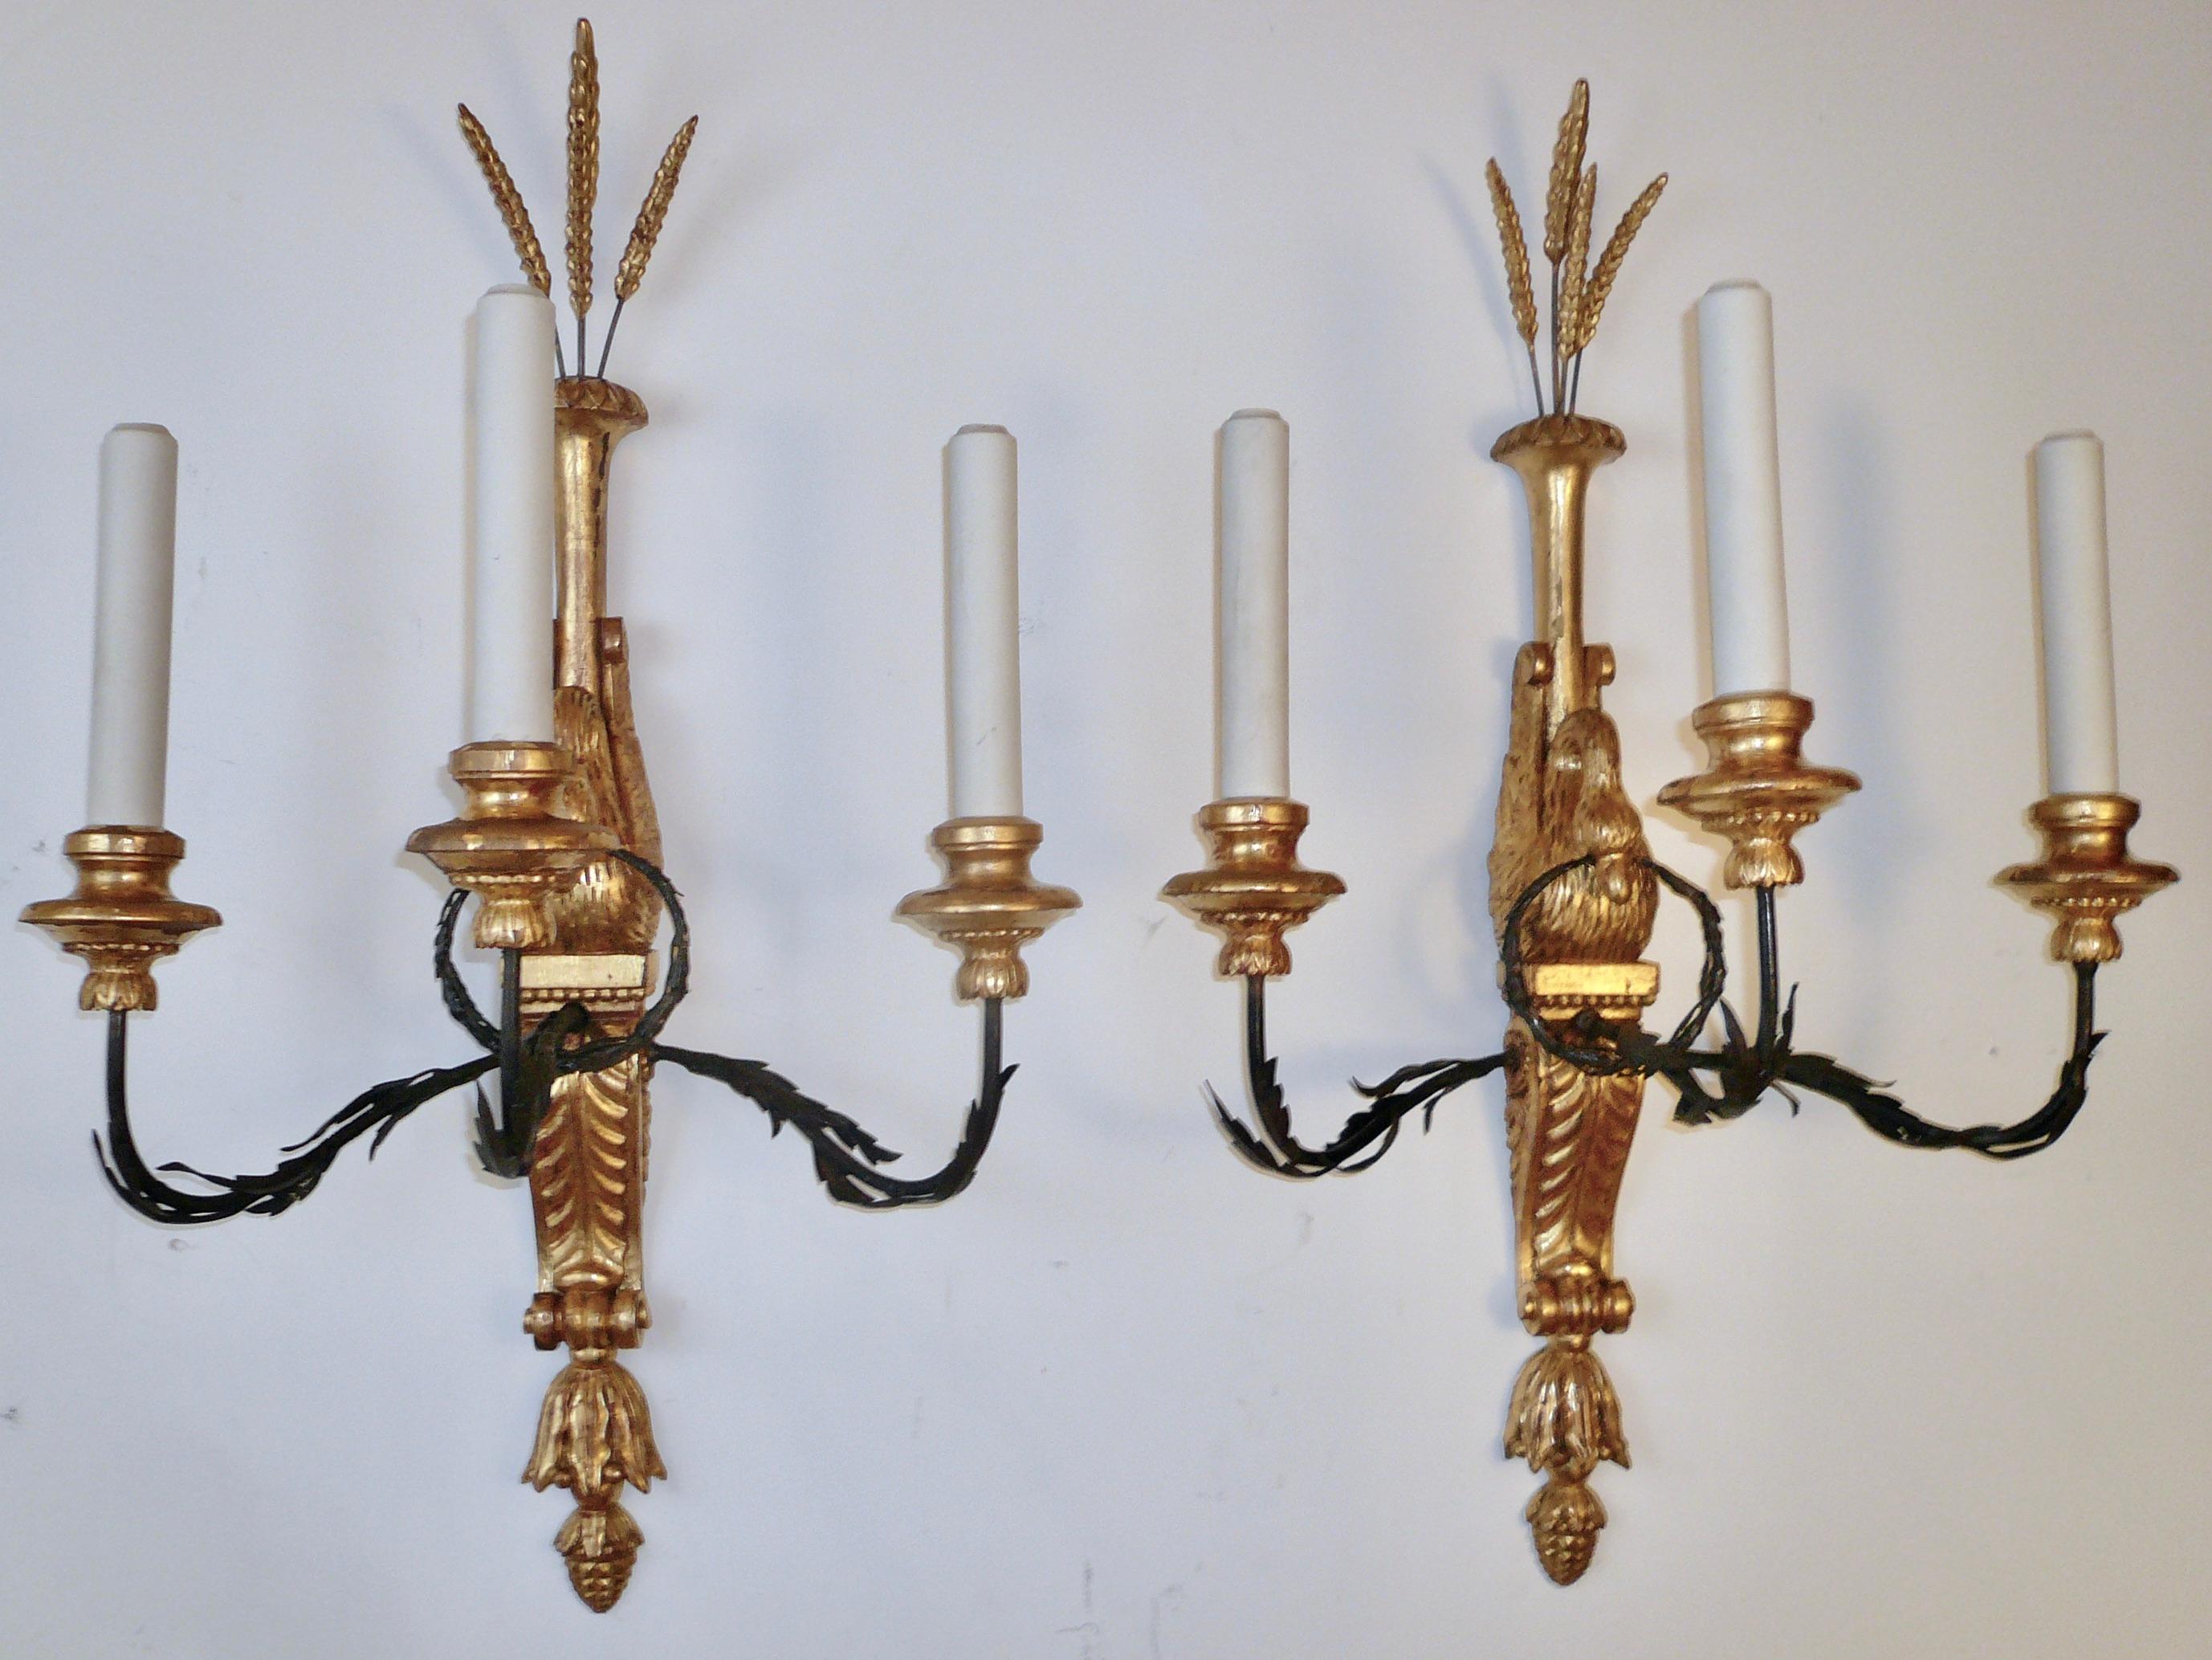 This rare set of six signed sconces (sold by the pair), are hand carved and feature Classical motifs including bellflowers, acanthus leaves, and pinecone finials.
Each sconce consists of a carved giltwood swan holding an hand forged iron wreath in